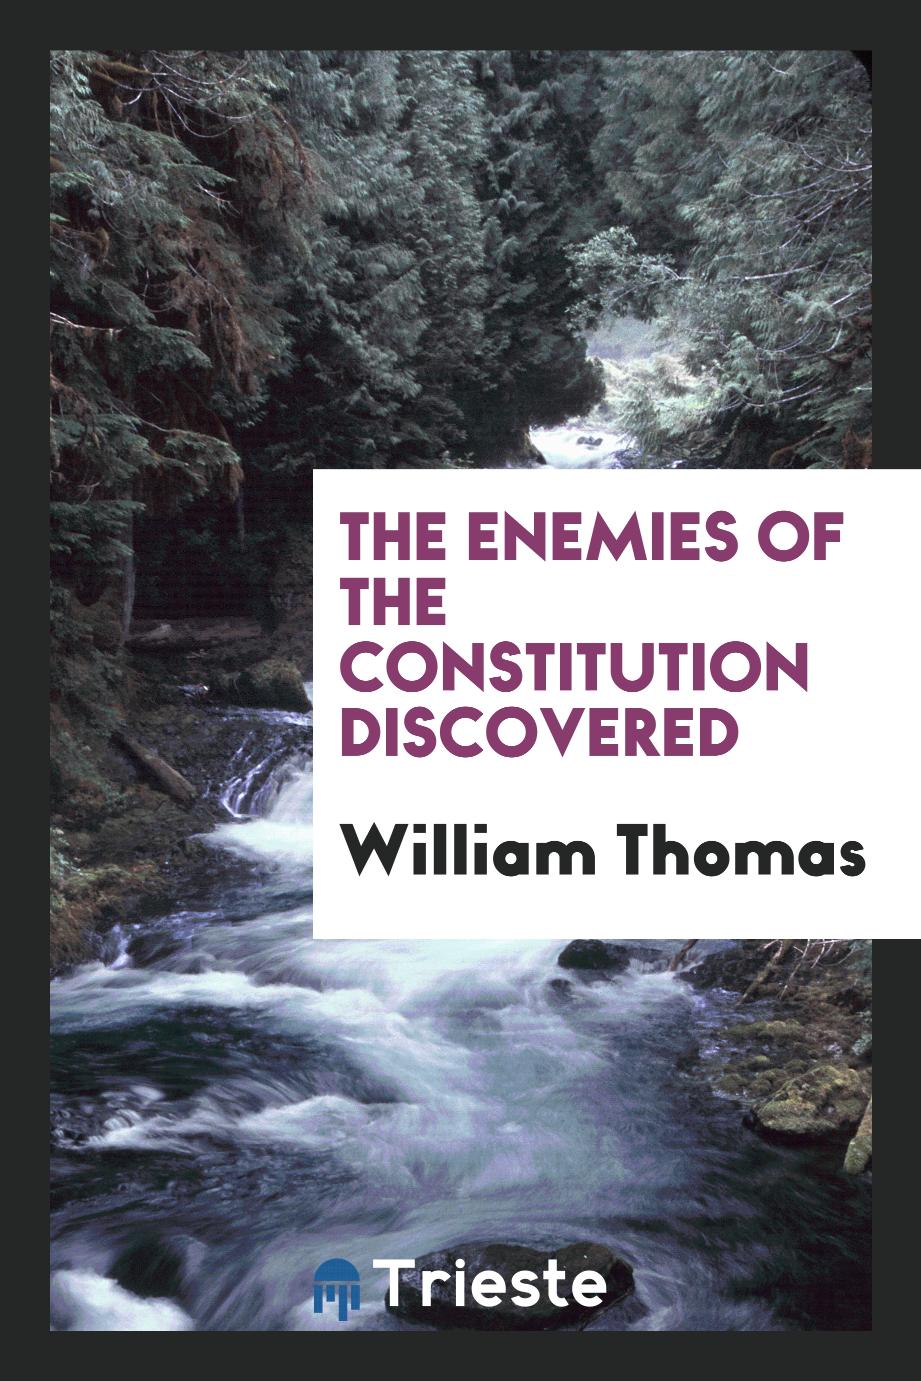 The enemies of the Constitution discovered